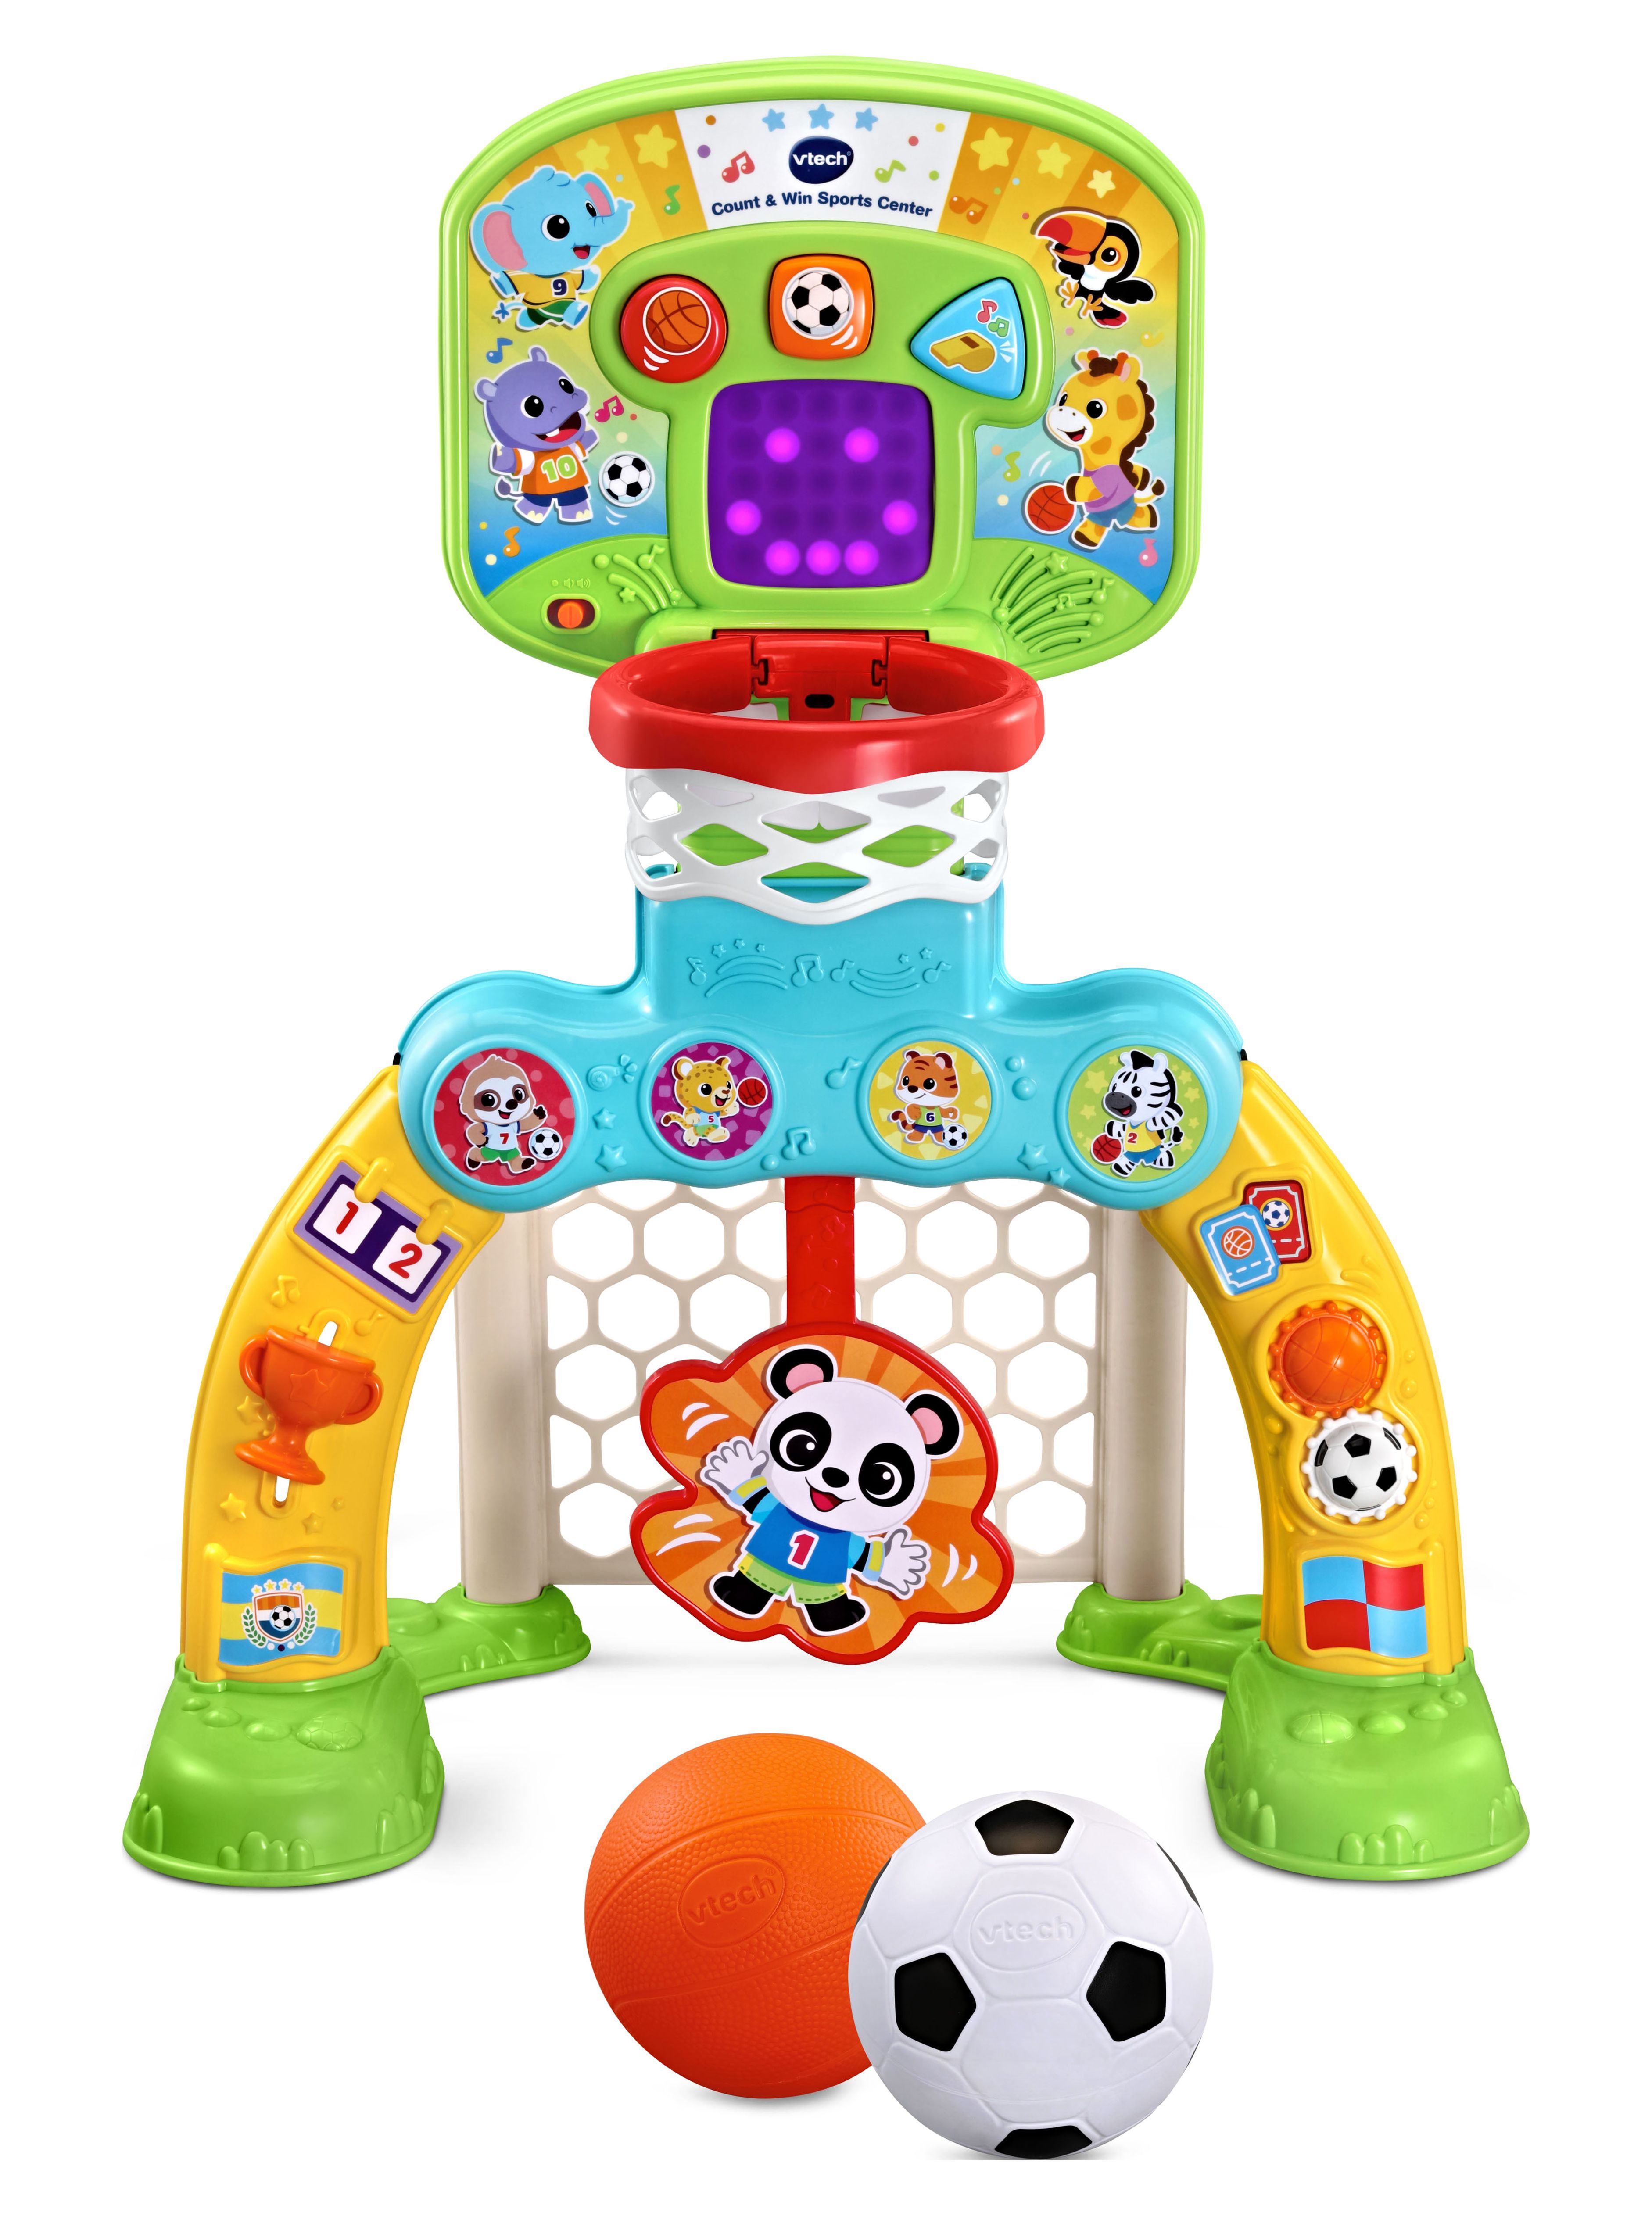 VTech Count & Win Sports Center, Basketball and Soccer Toy for Toddlers, Teaches Physical Activity - image 1 of 13